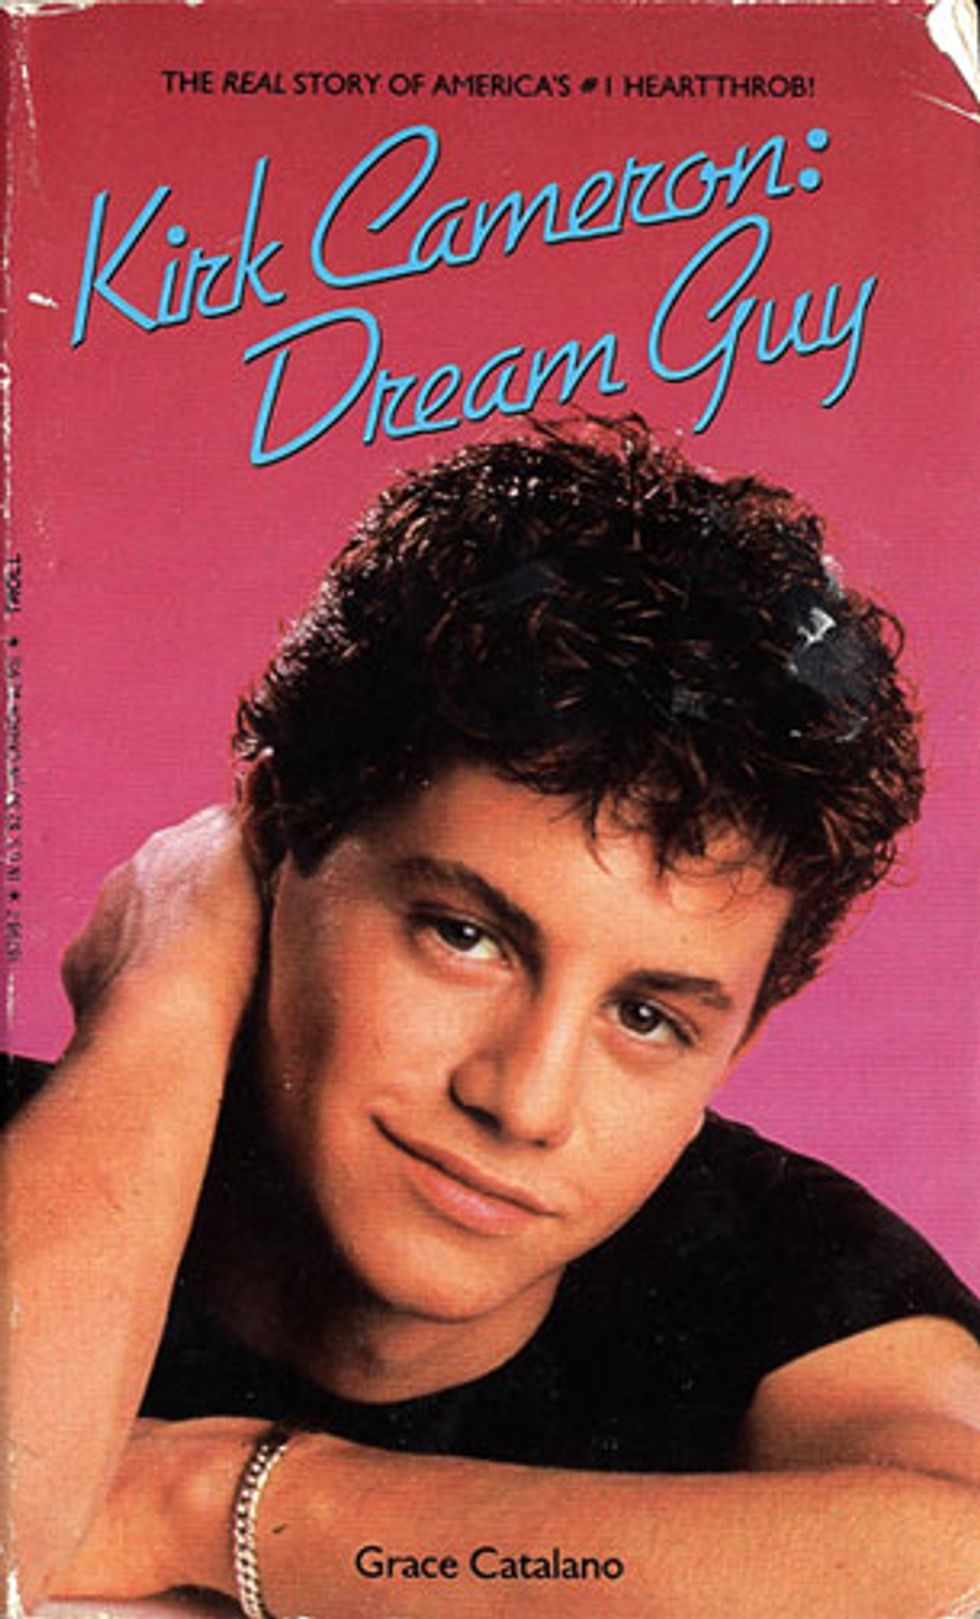 Here Is The Gay Evolution Kirk Cameron Sexxytime Novelette You Didn't Know You Needed